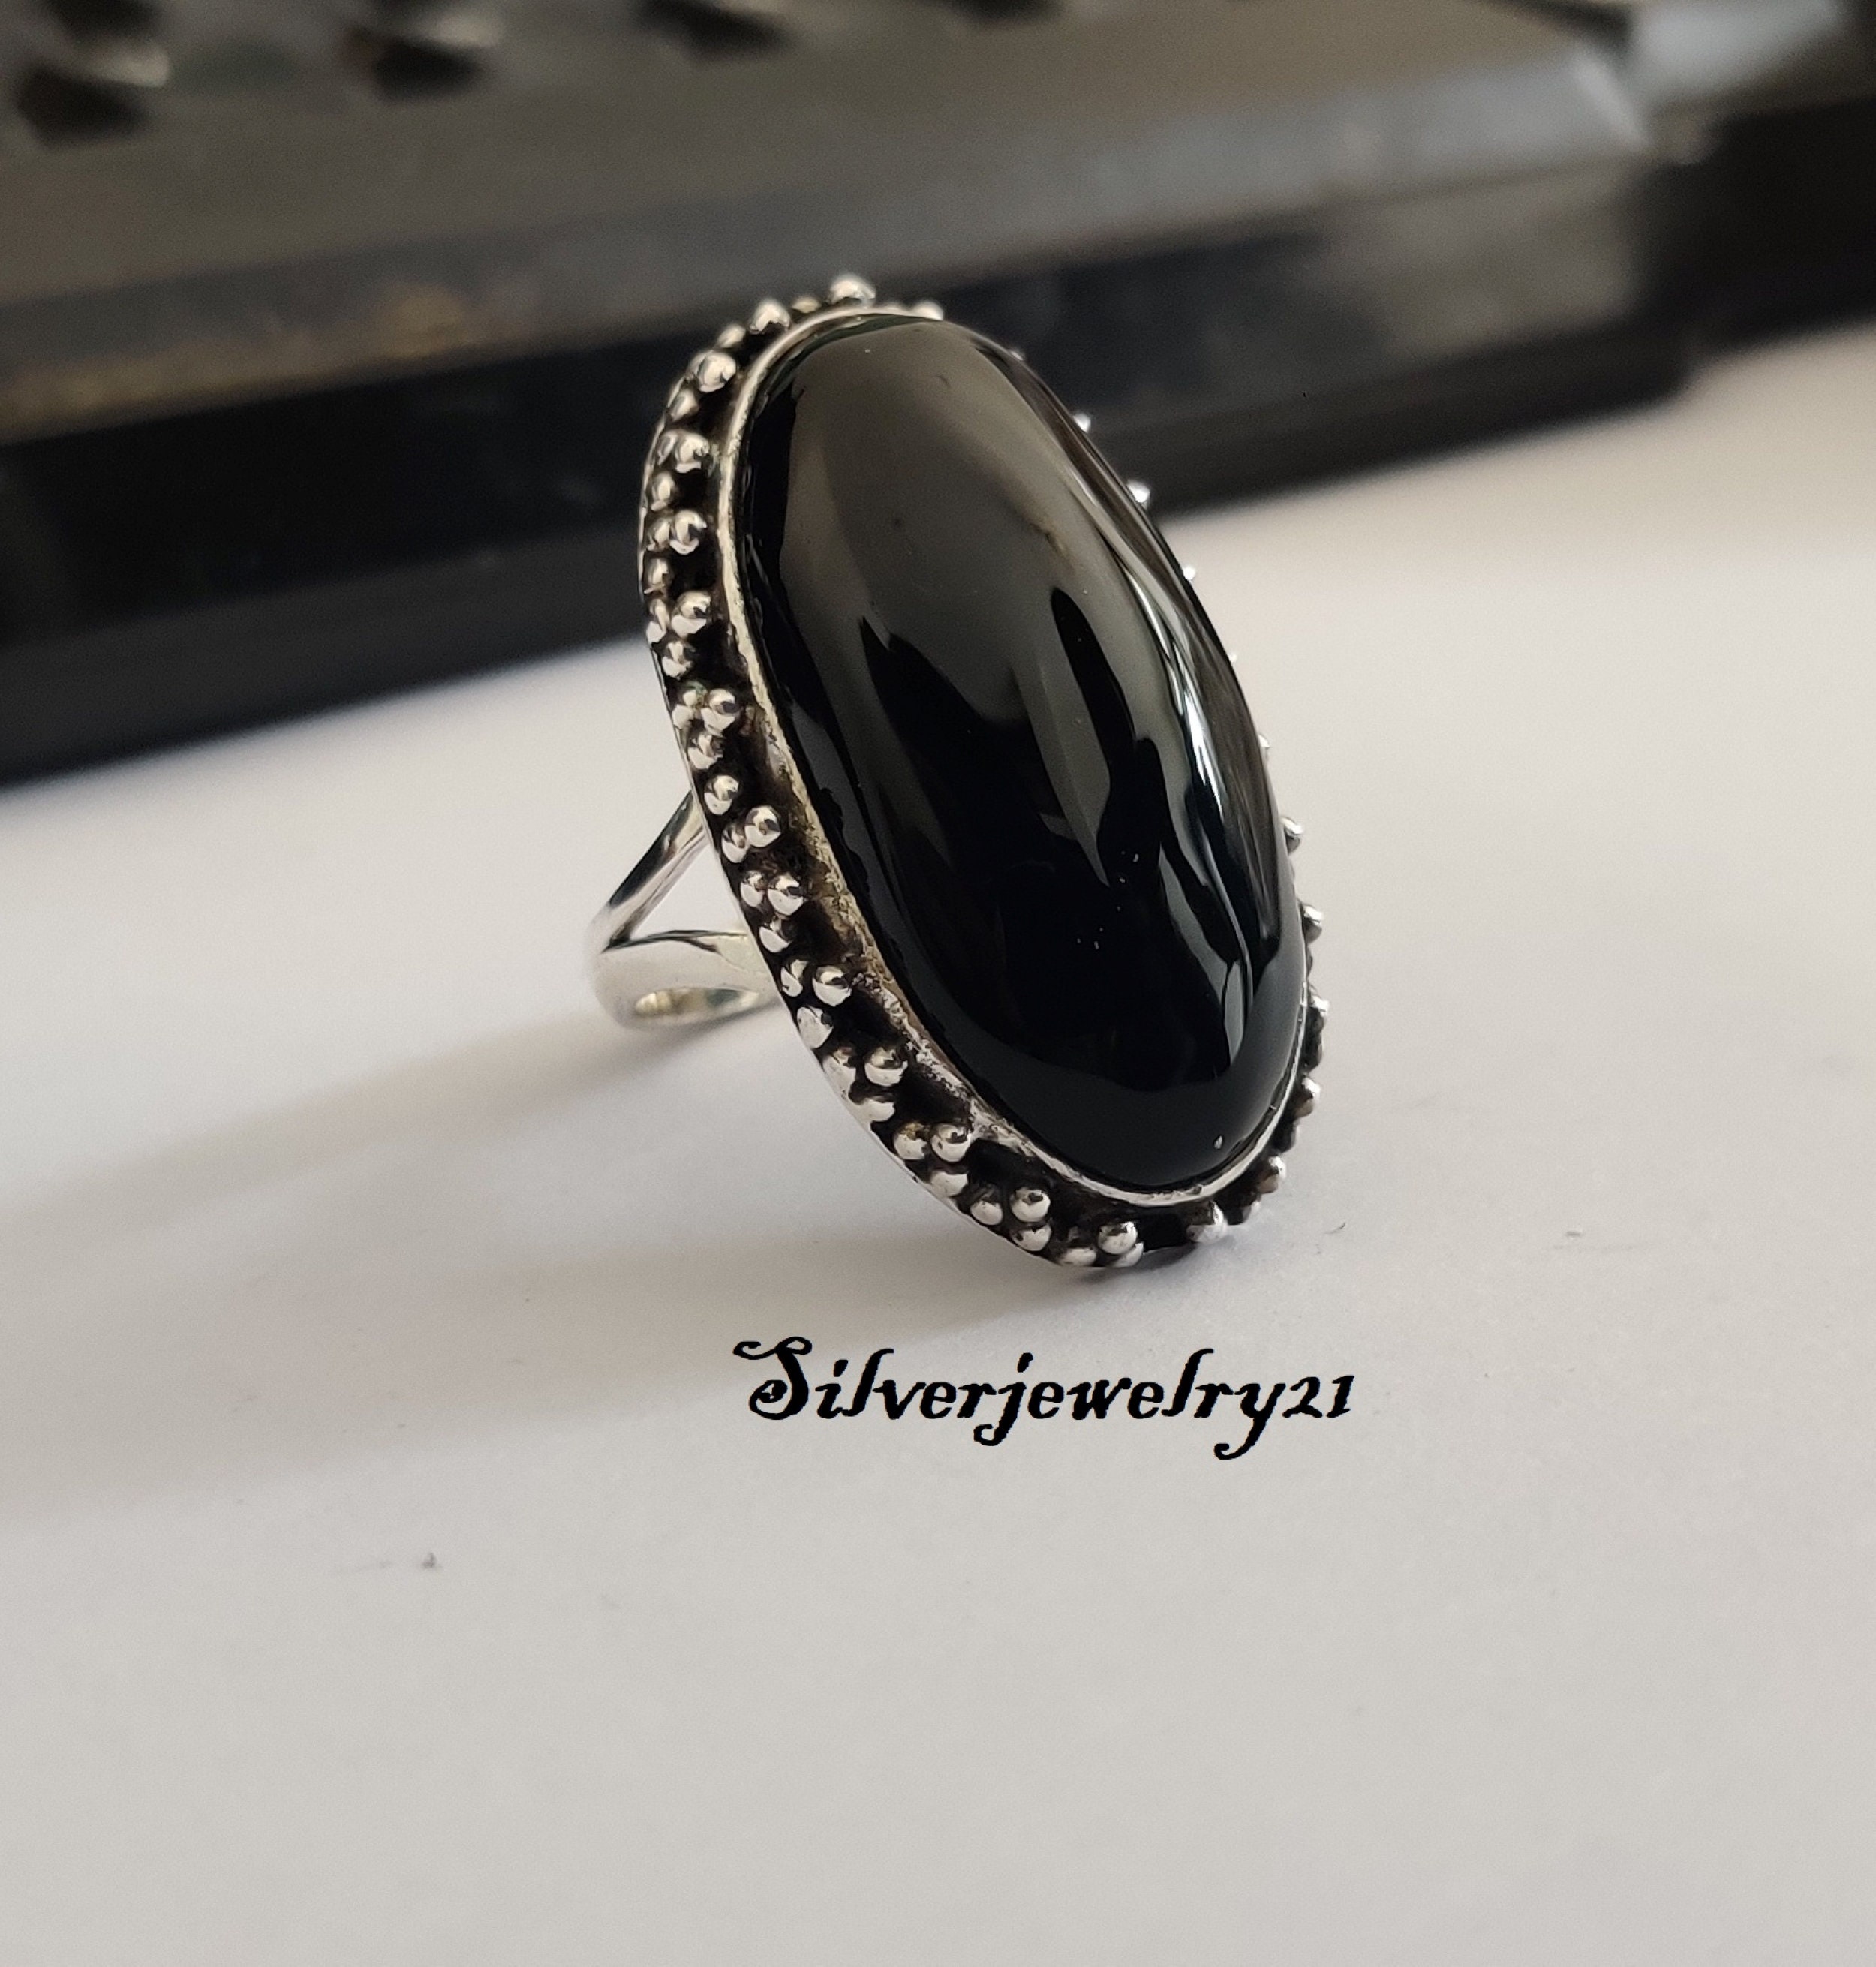 Black Onyx 925 Silver Plated Handmade Jewelry Ring US Size 6 R-18992